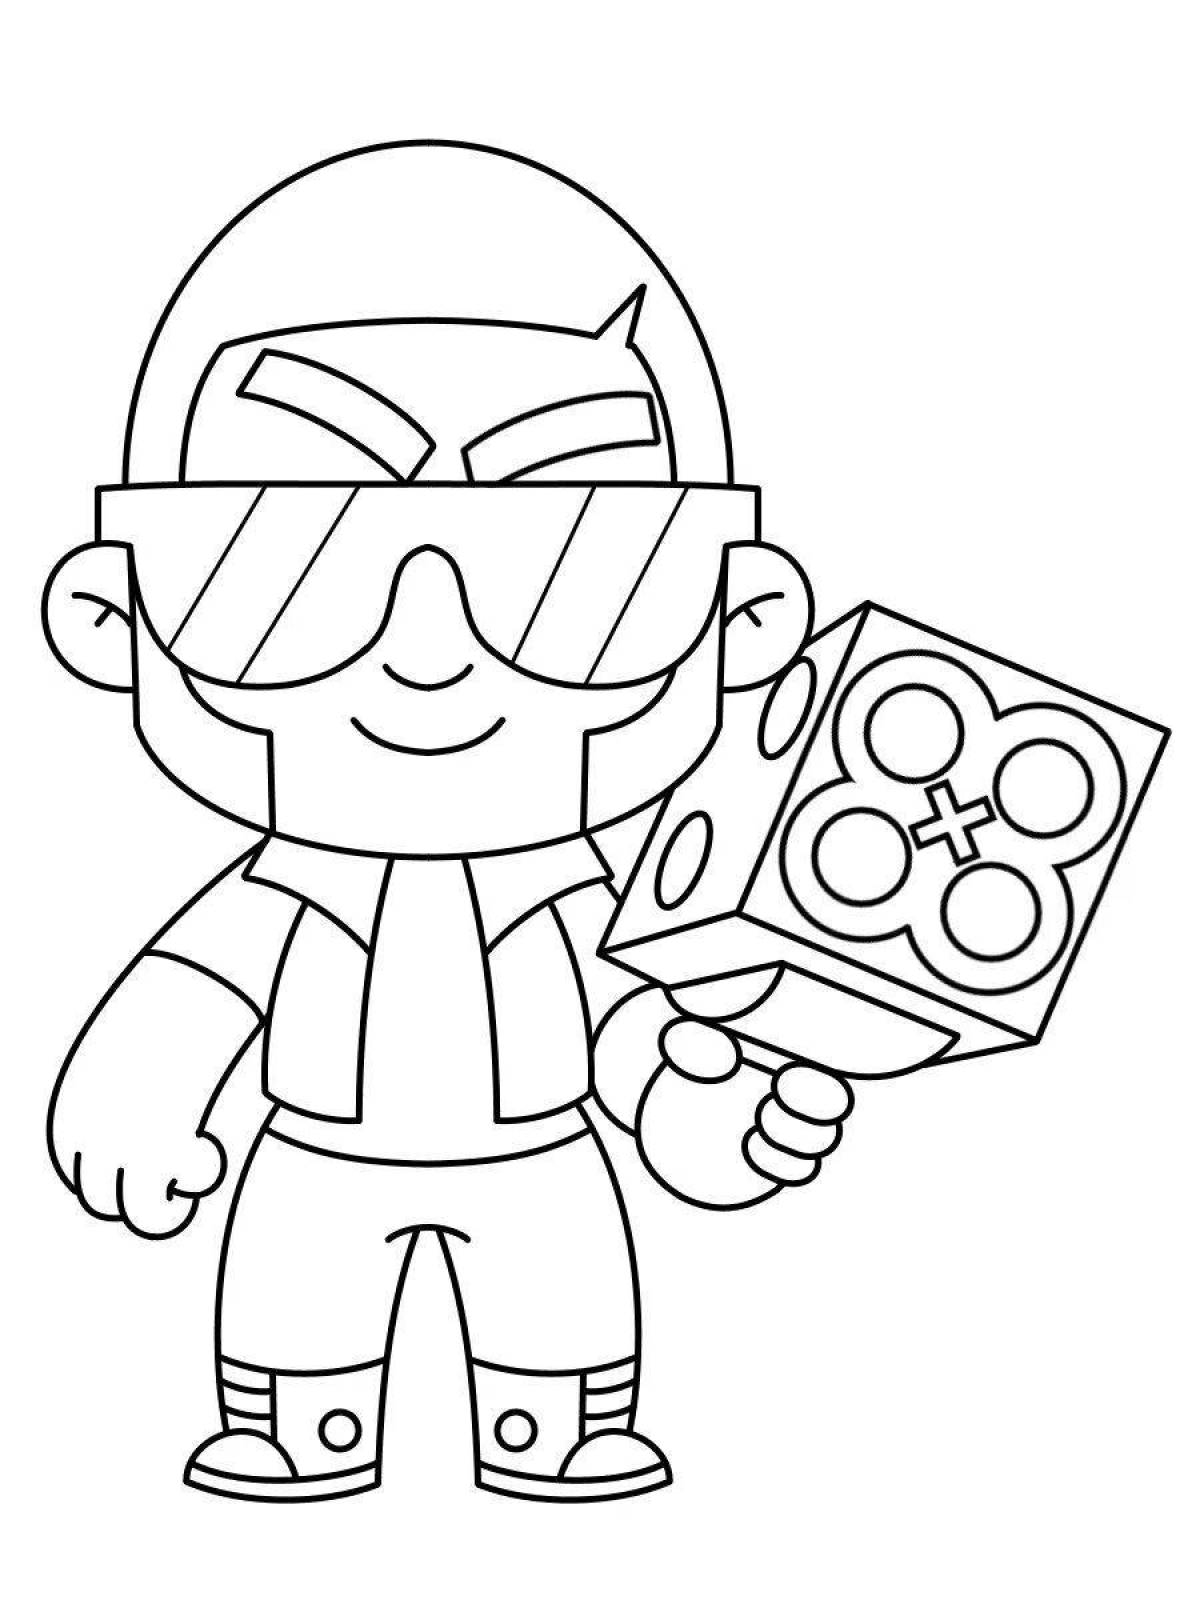 Funny browstars coloring pages for kids